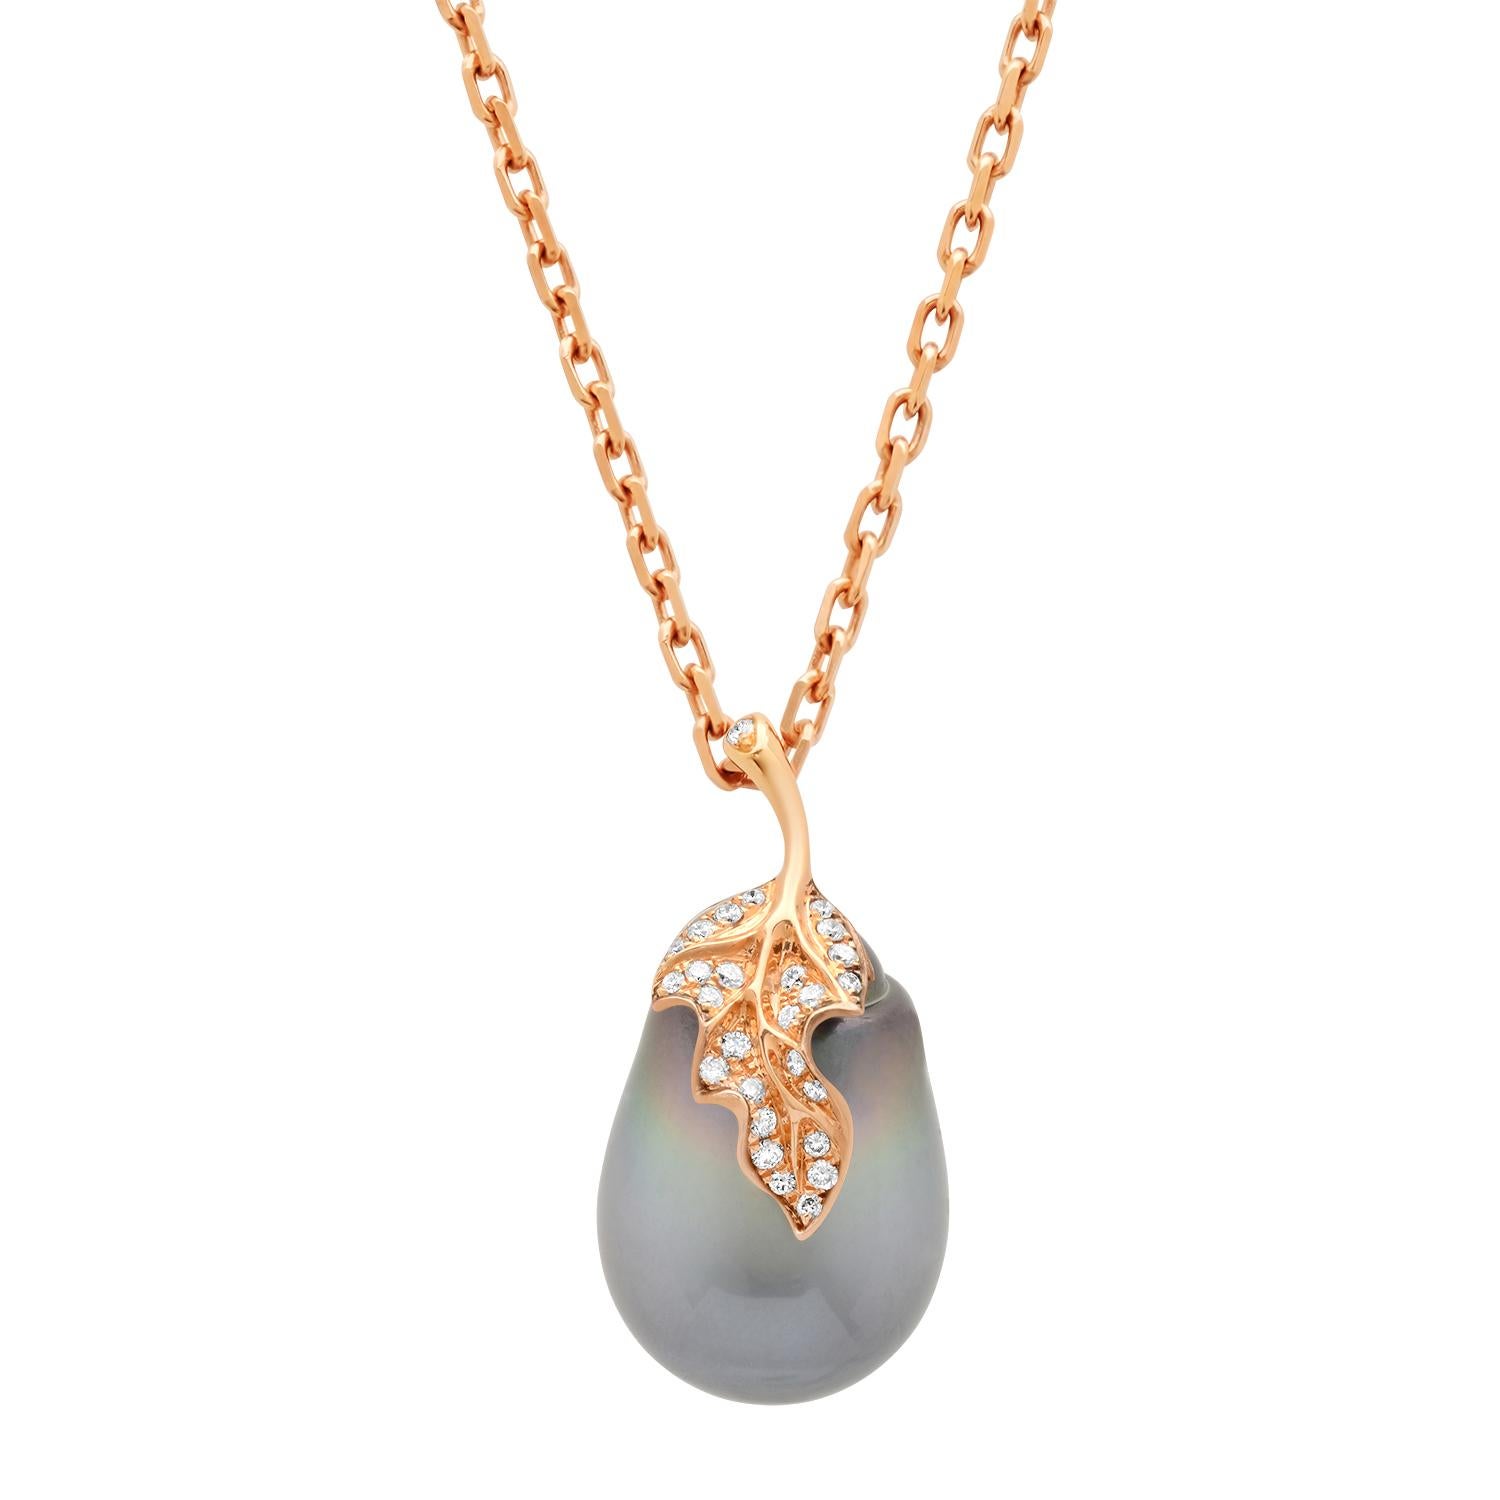 Unique Tahitian pearl pendant by Samira 13 Jewelry on 22 inch 18k rose gold chain with white diamond leaf accent.

Exploring the unique and varied aspects of pearls is the cornerstone of Samira 13 Jewelry.
Founder/designer Samira Sizdahkhani